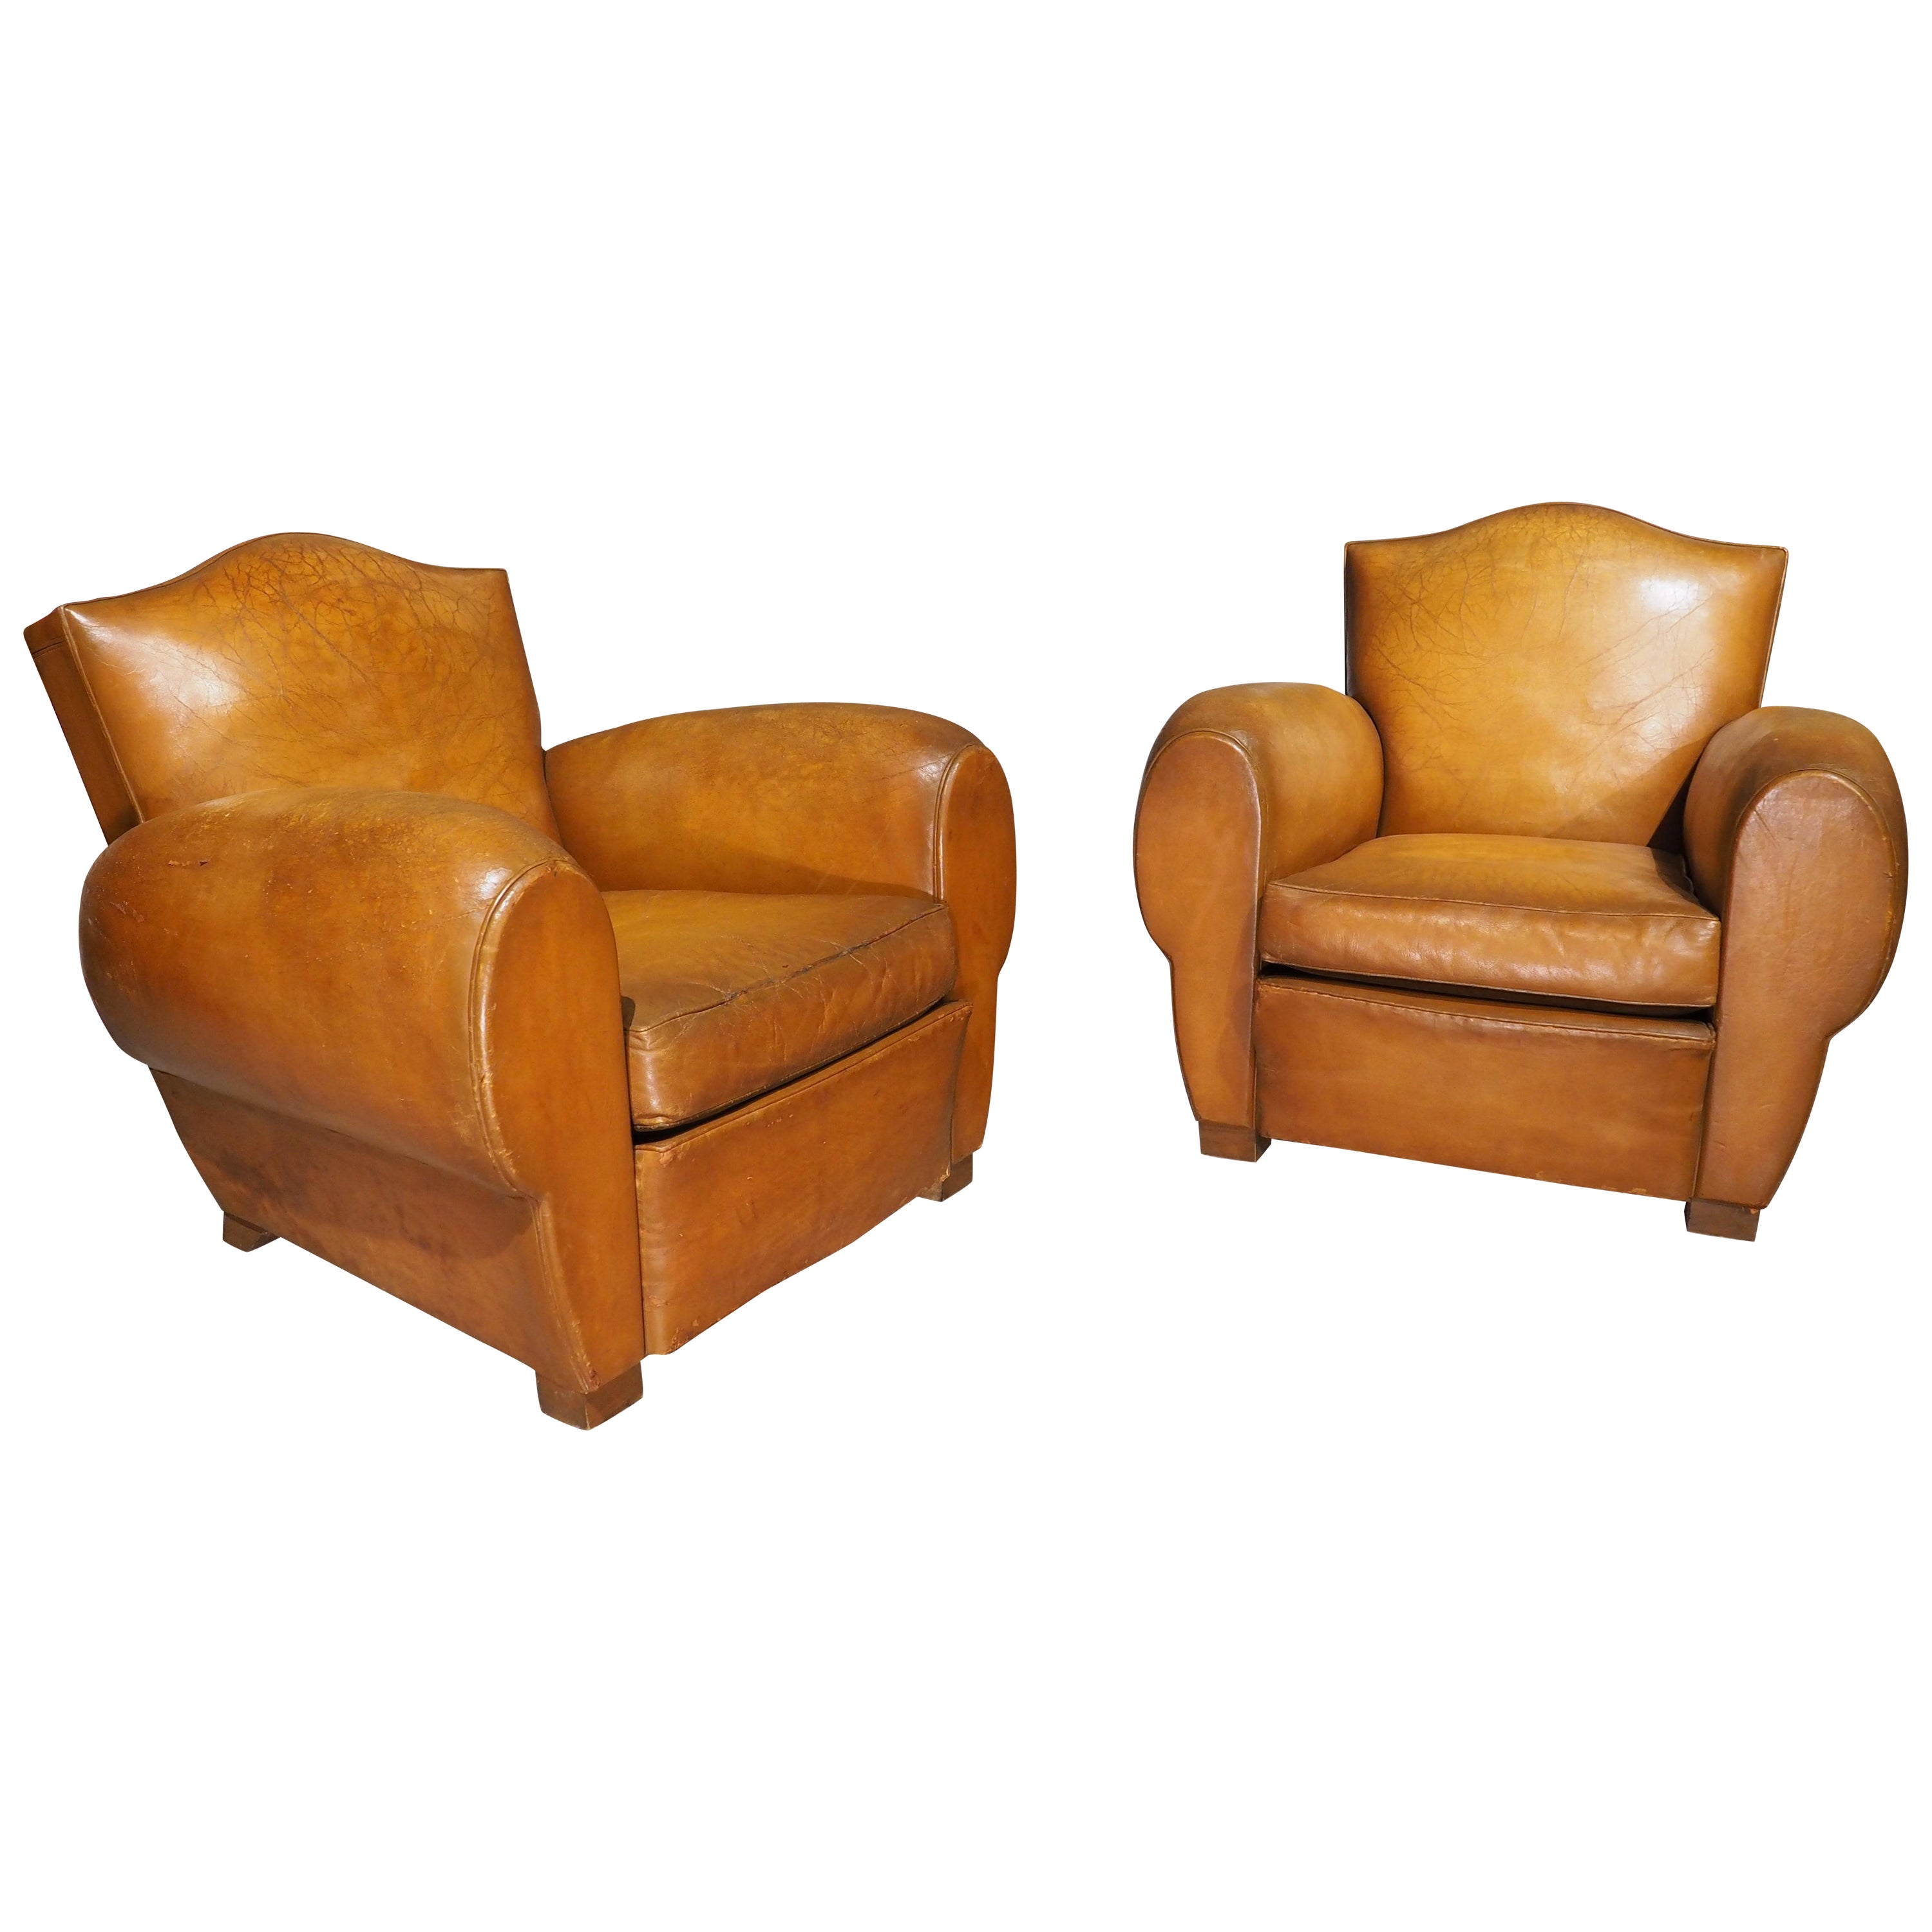 Pair of Large French Leather Club Chairs, Circa 1950